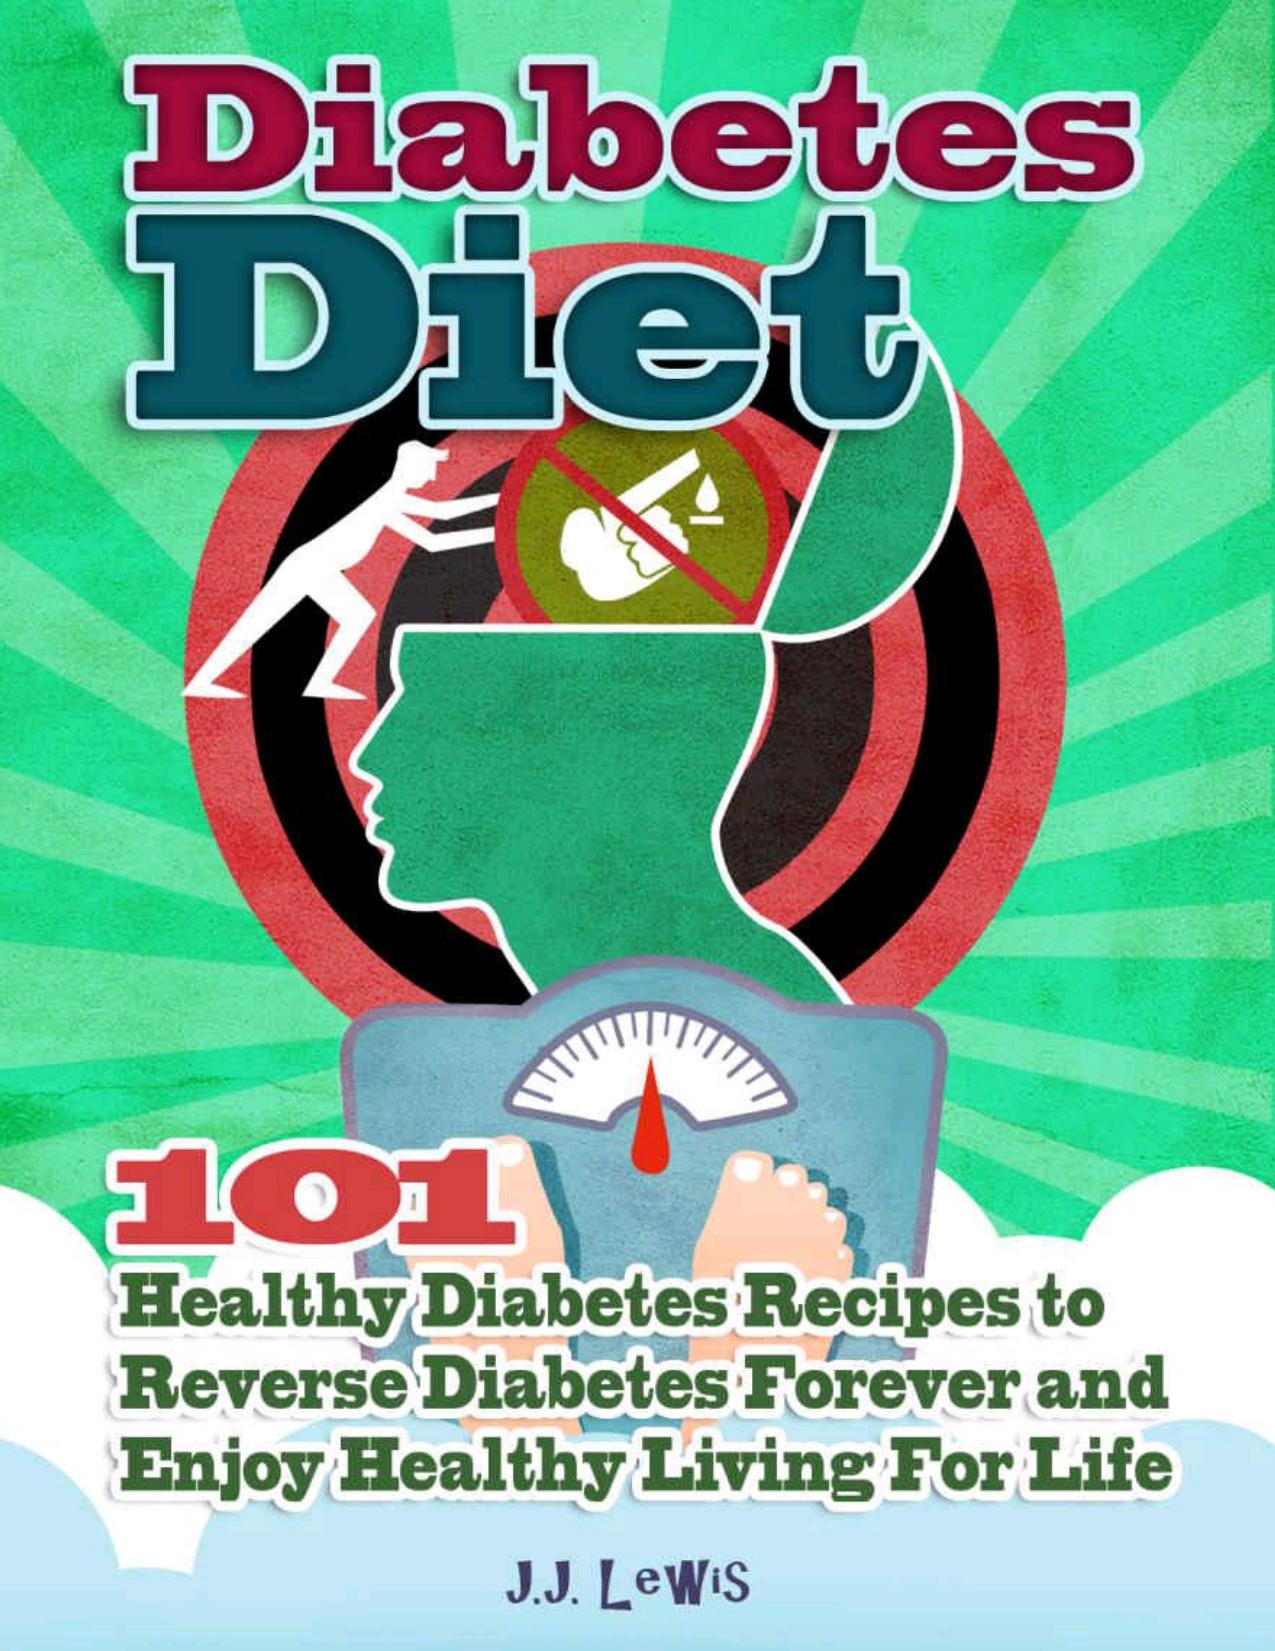 Diabetes Diet: 101 Healthy Diabetes Recipes to Reverse Diabetes Forever and Enjoy Healthy Living For Life by Lewis J.J